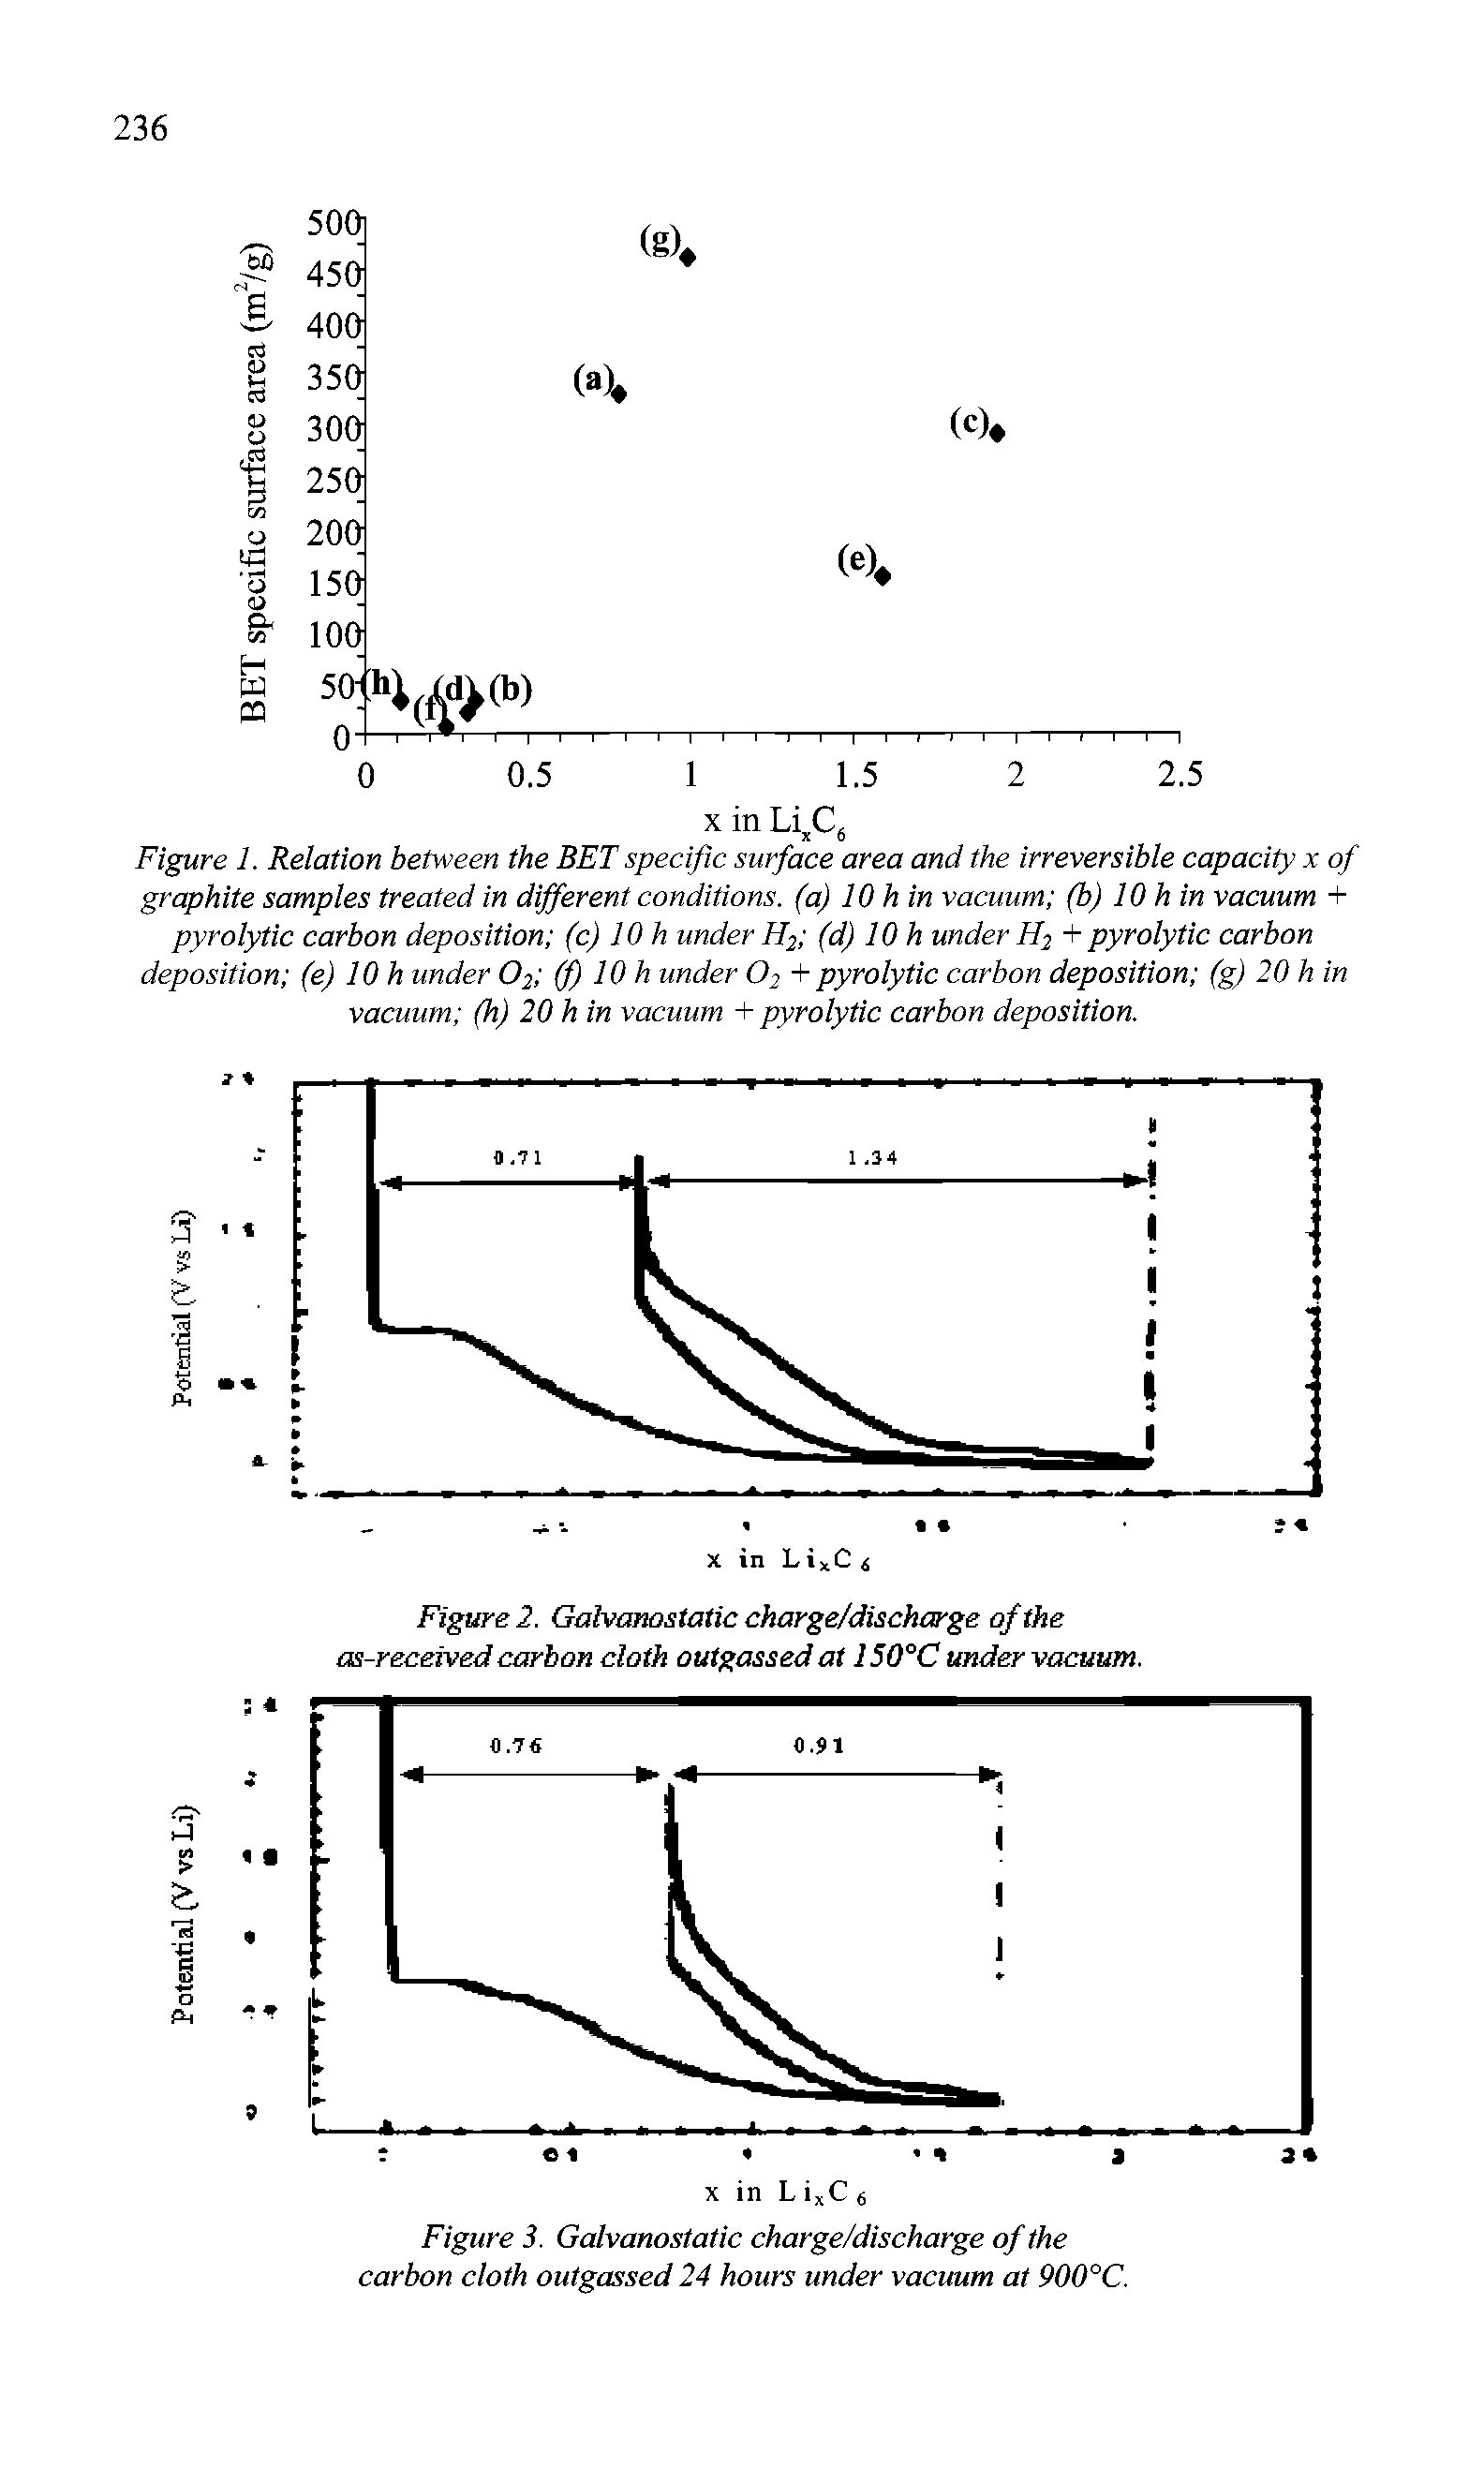 Figure 3. Galvanostatic charge/discharge of the carbon cloth outgassed 24 hours under vacuum at 900°C.